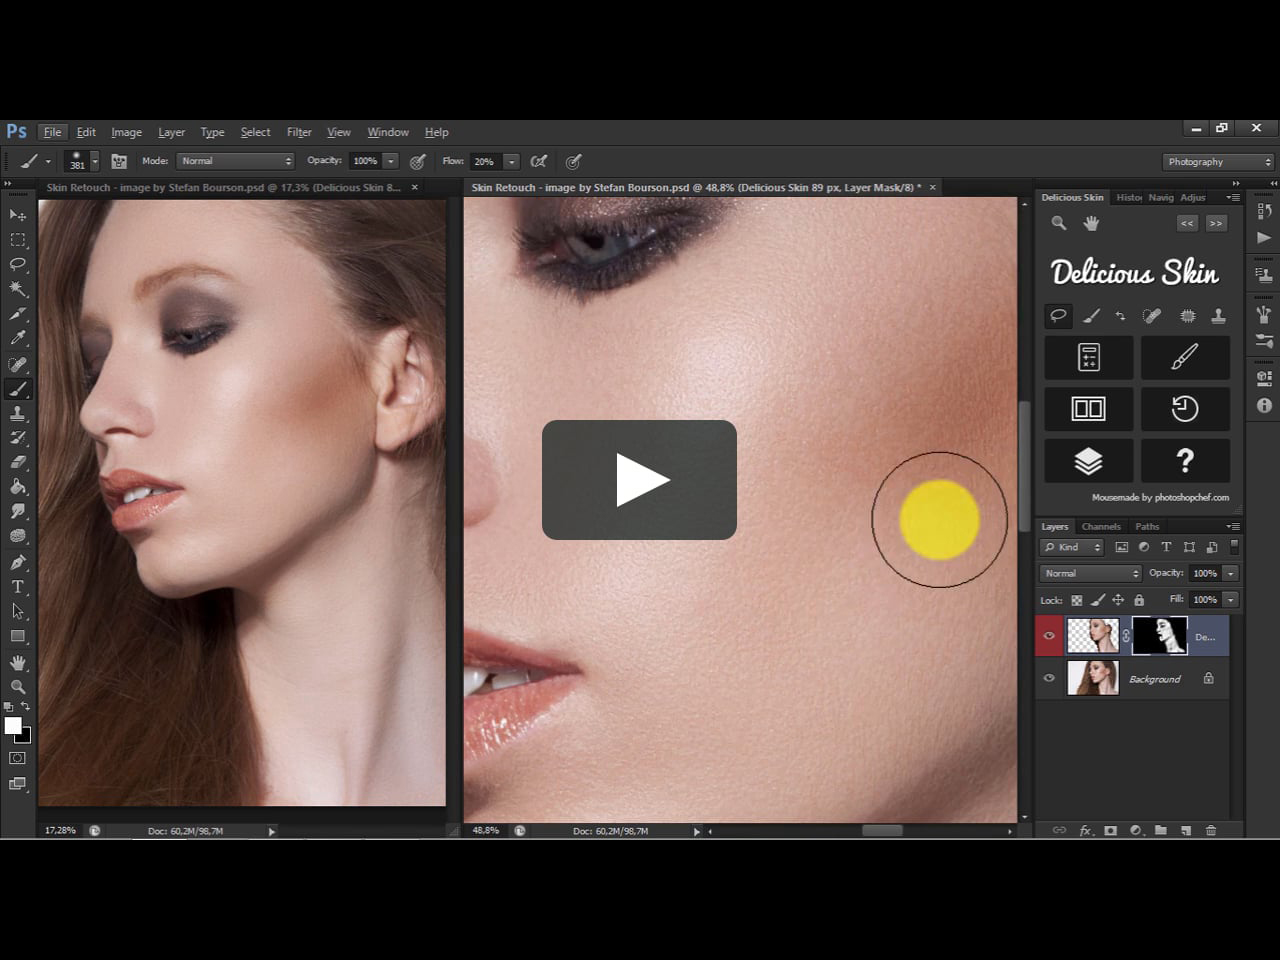 Ultimate Retouch Panel 3.5 Crack FREE Download